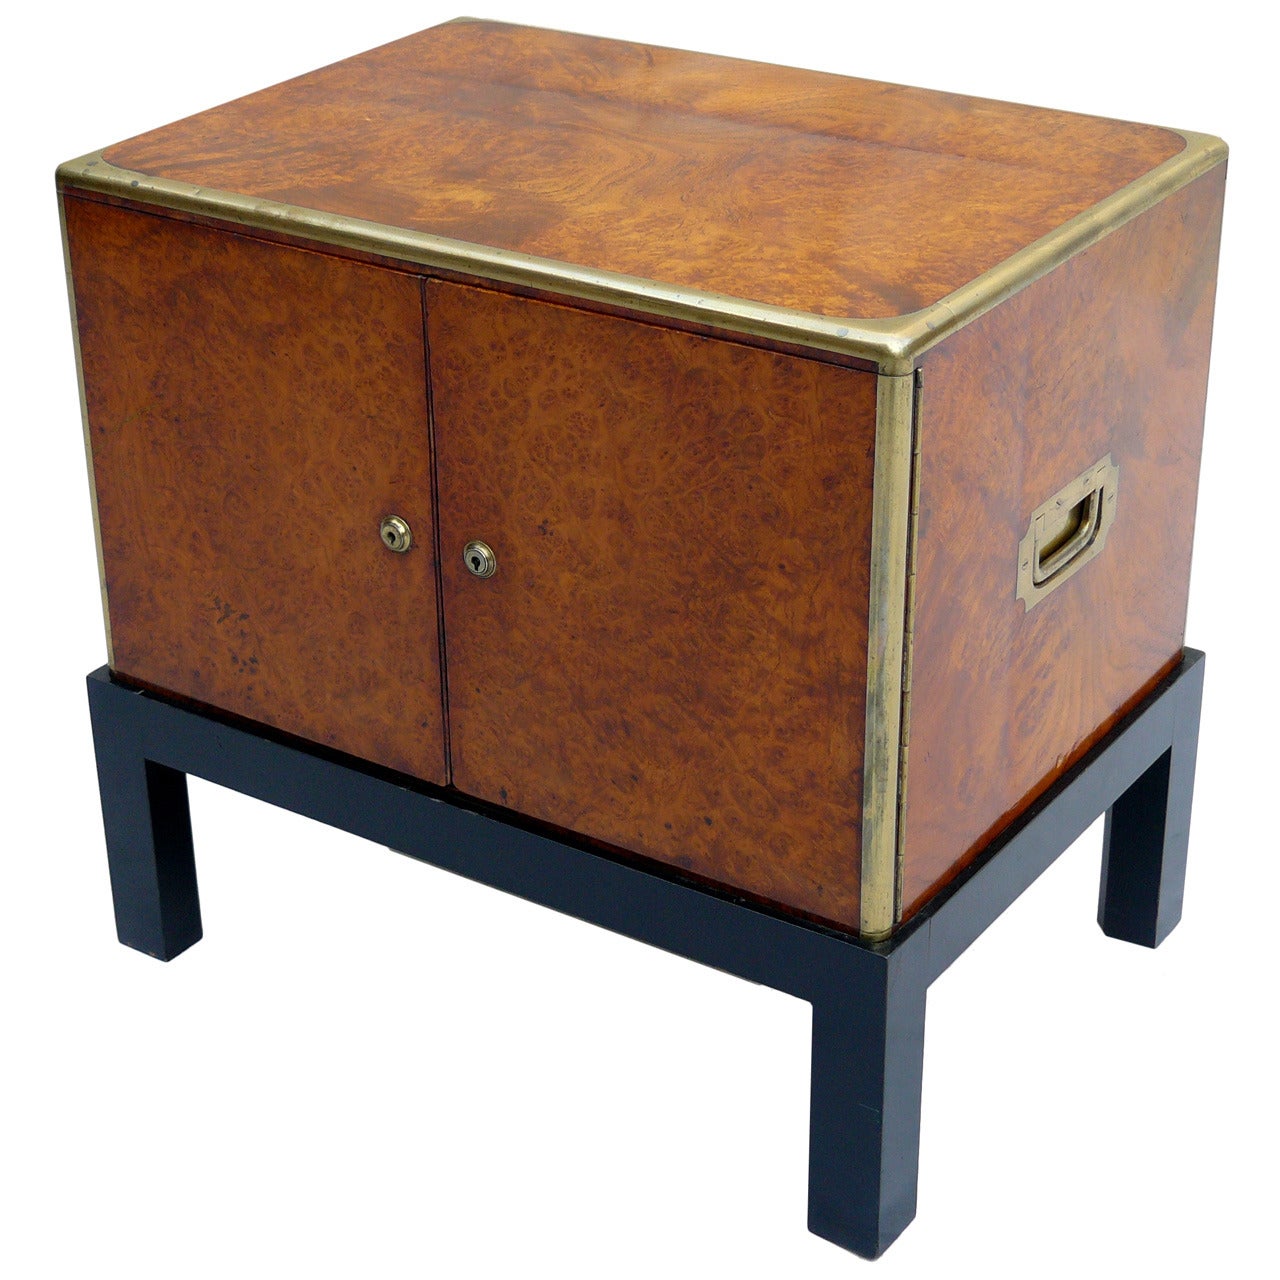 Exquisite Early 1800, British Burl and Brass Cigar Humidor Chest on Stand